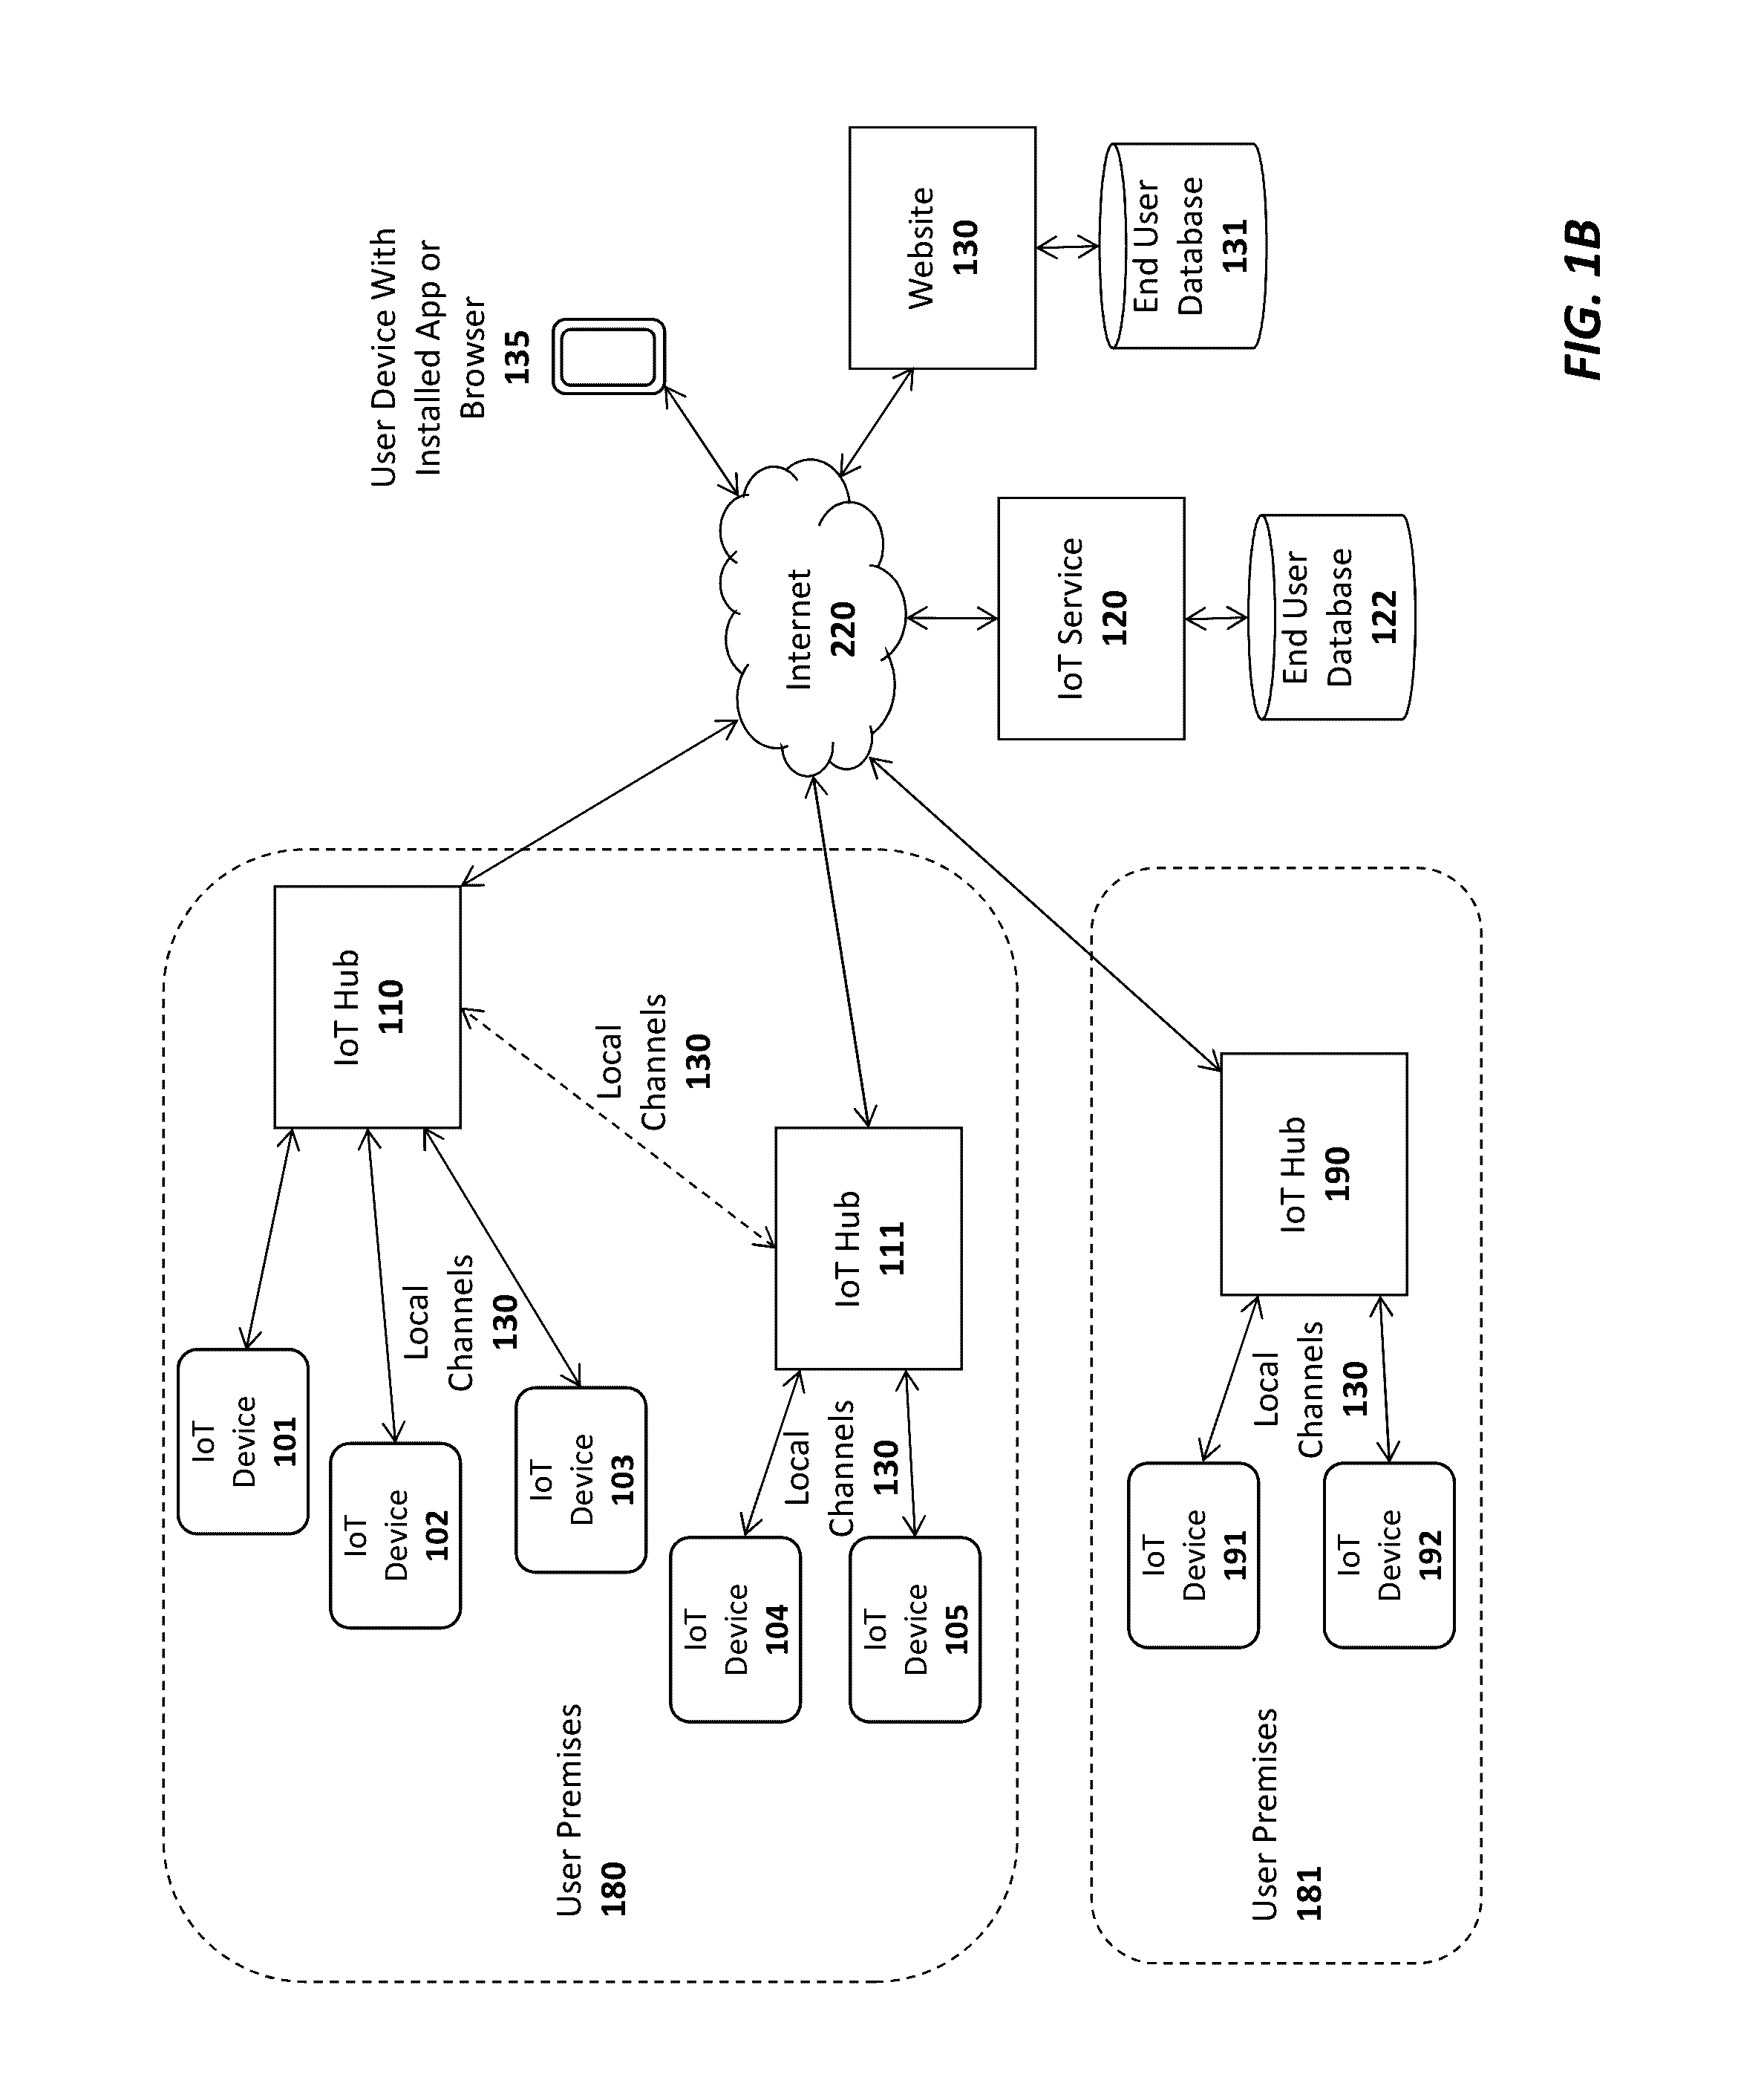 System and method for automatic wireless network authentication